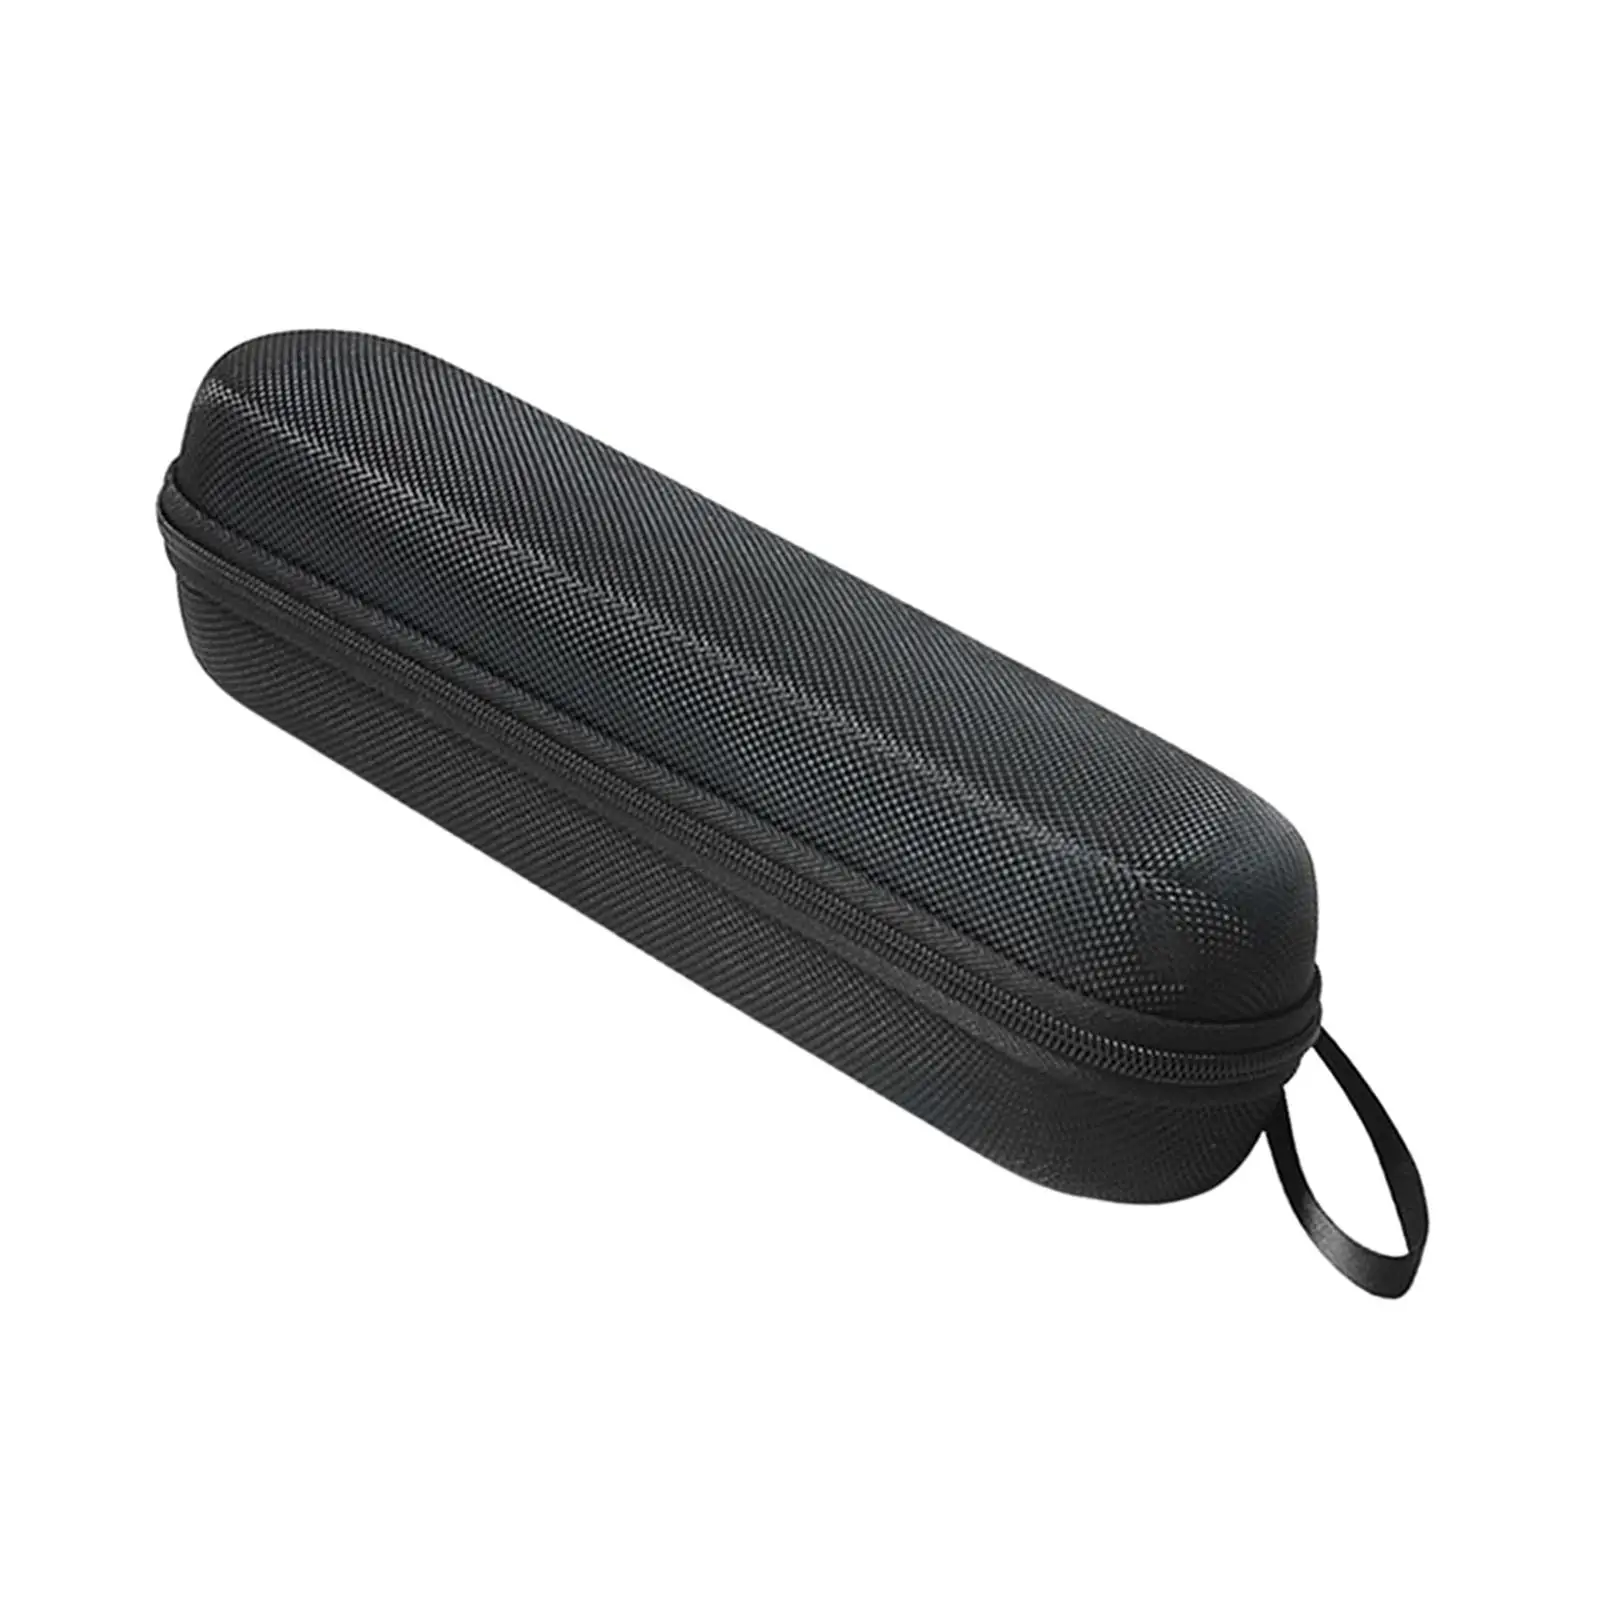 Toothbrush Travel Case Pressureproof Durable 278x70x70mm Easy to Carry Waterproof Storage Holder Bag EVA Protective Storage Bag